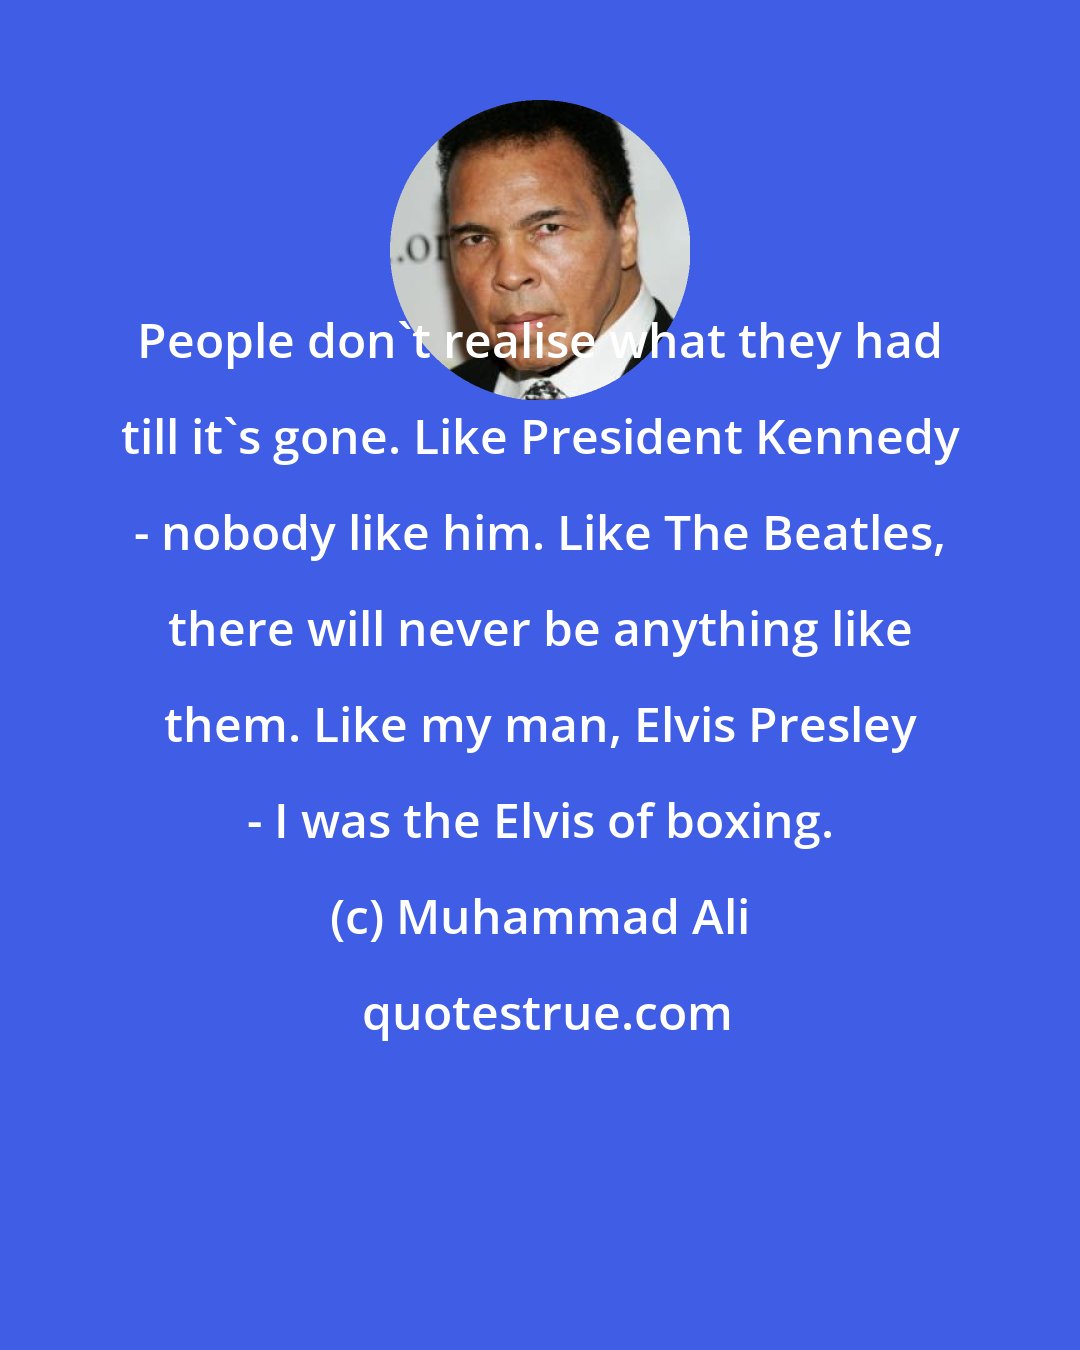 Muhammad Ali: People don't realise what they had till it's gone. Like President Kennedy - nobody like him. Like The Beatles, there will never be anything like them. Like my man, Elvis Presley - I was the Elvis of boxing.